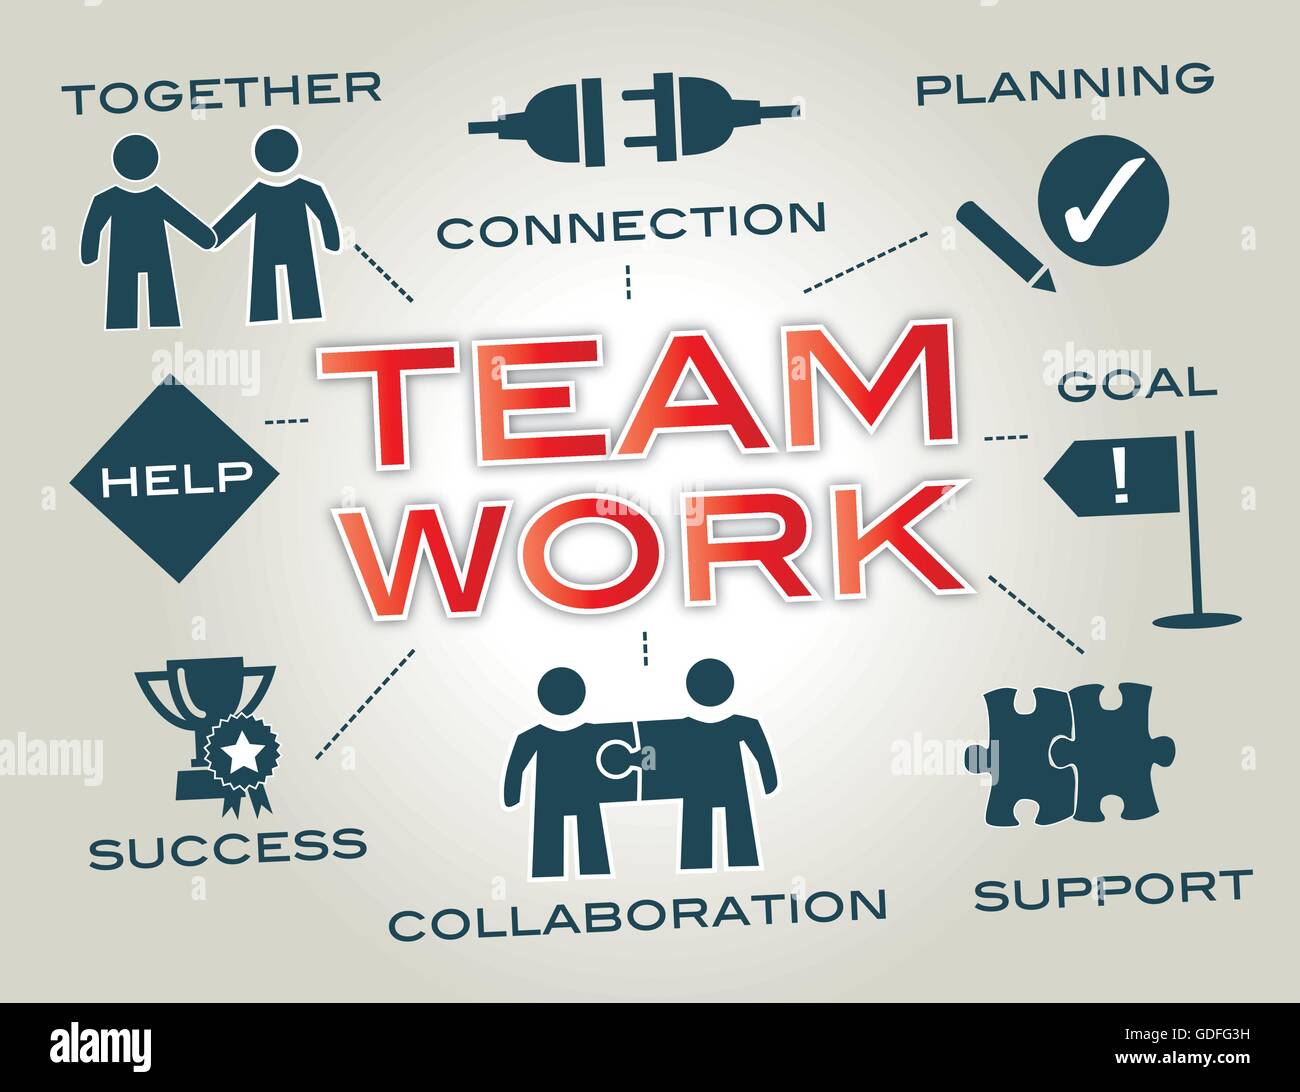 Teamwork - Infographic with Keywords and icons Stock Vector